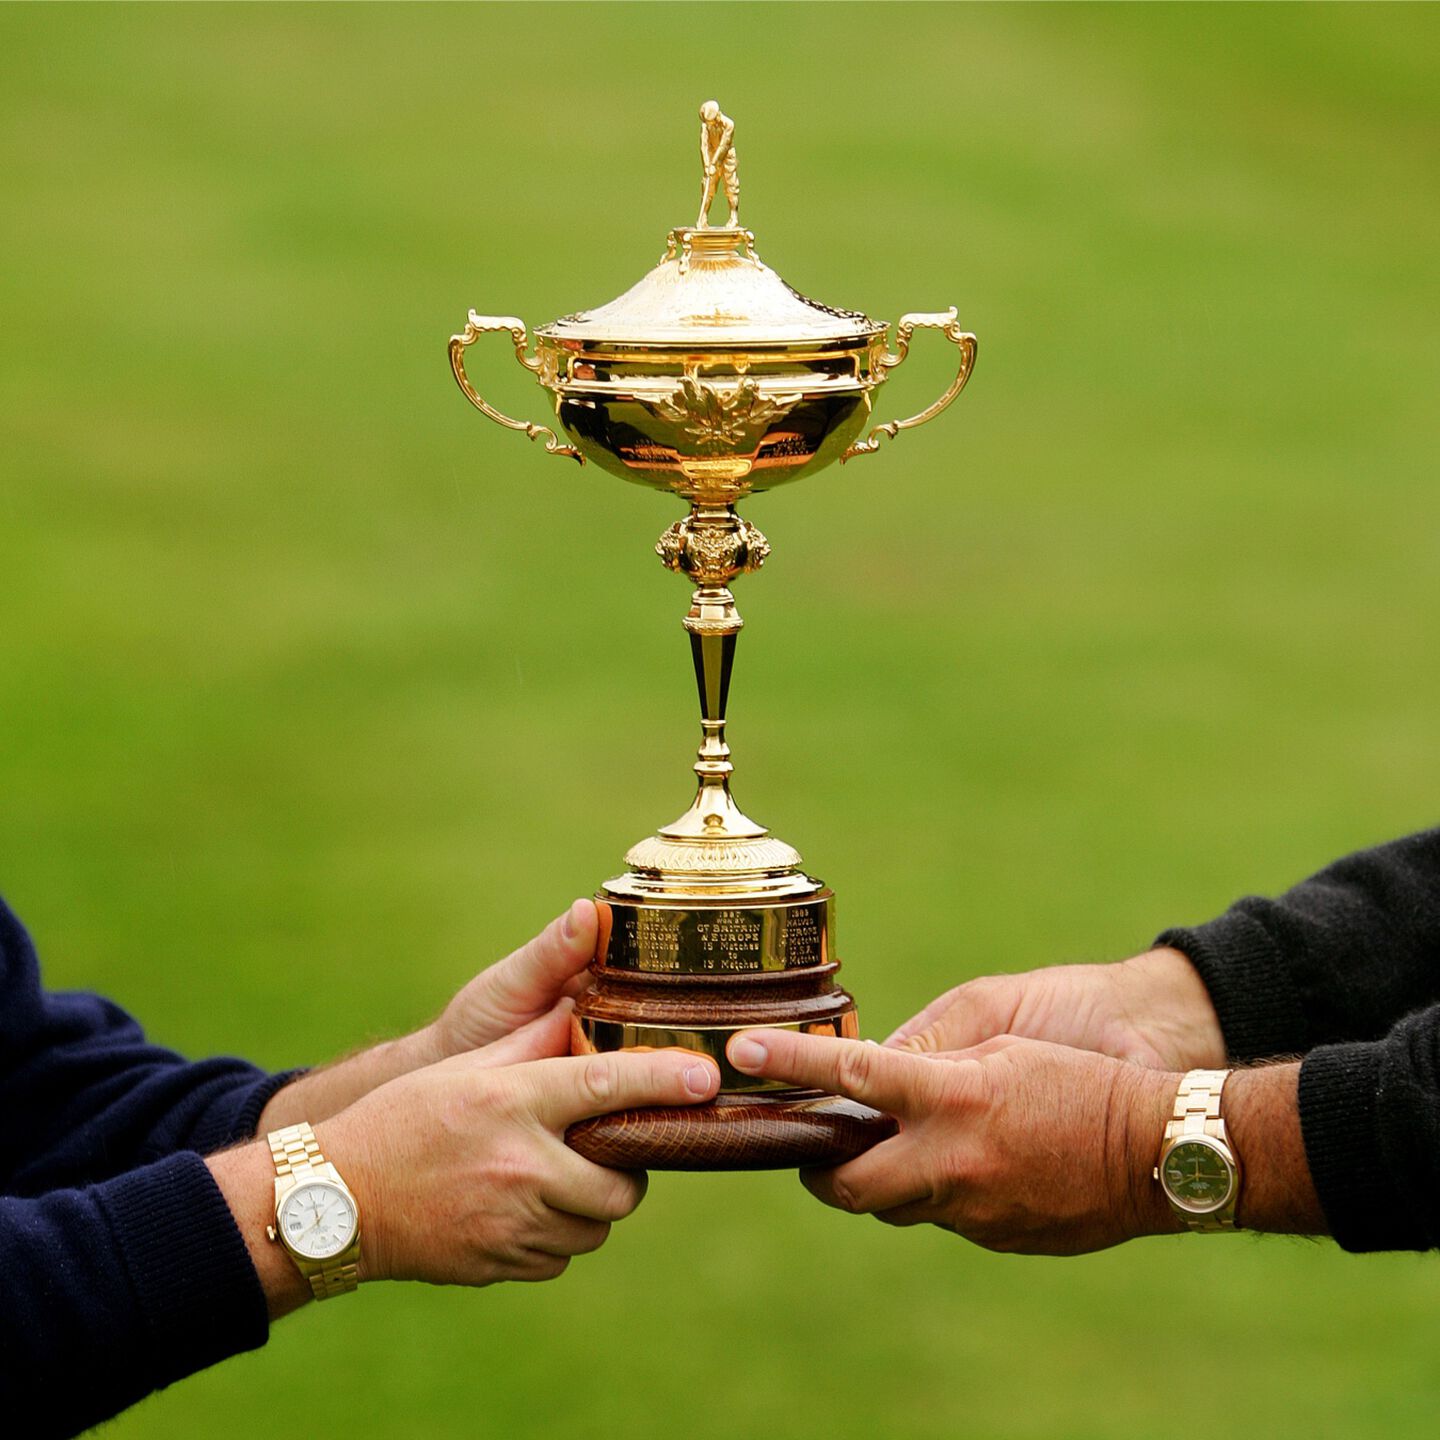 Rolex and golf<br>A foundation of shared values